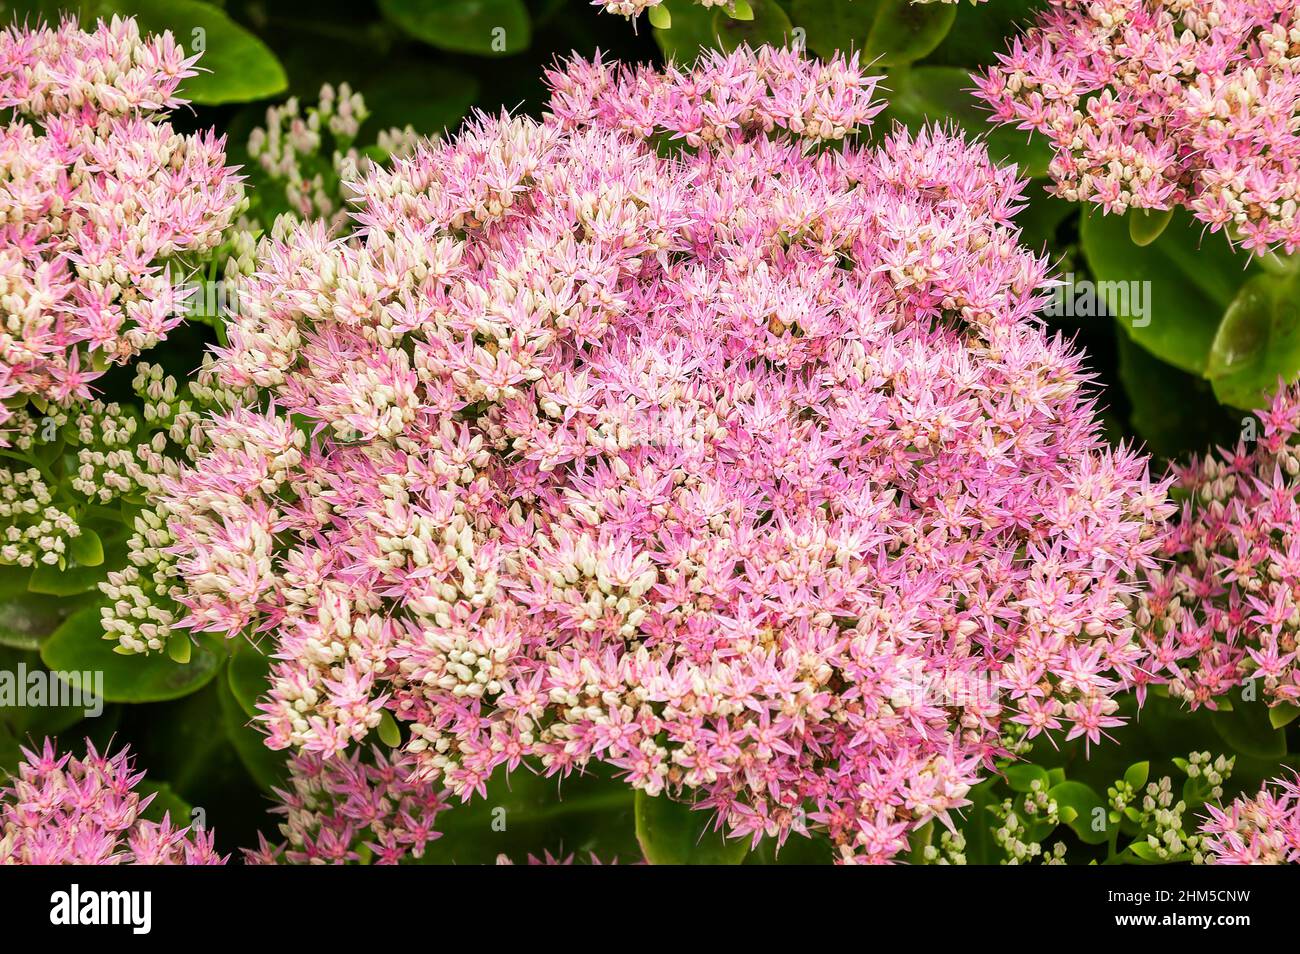 Sedum Spectabile a summer autumn pink perennial flower commonly known as stonecrop or ice plant, stock photo image Stock Photo